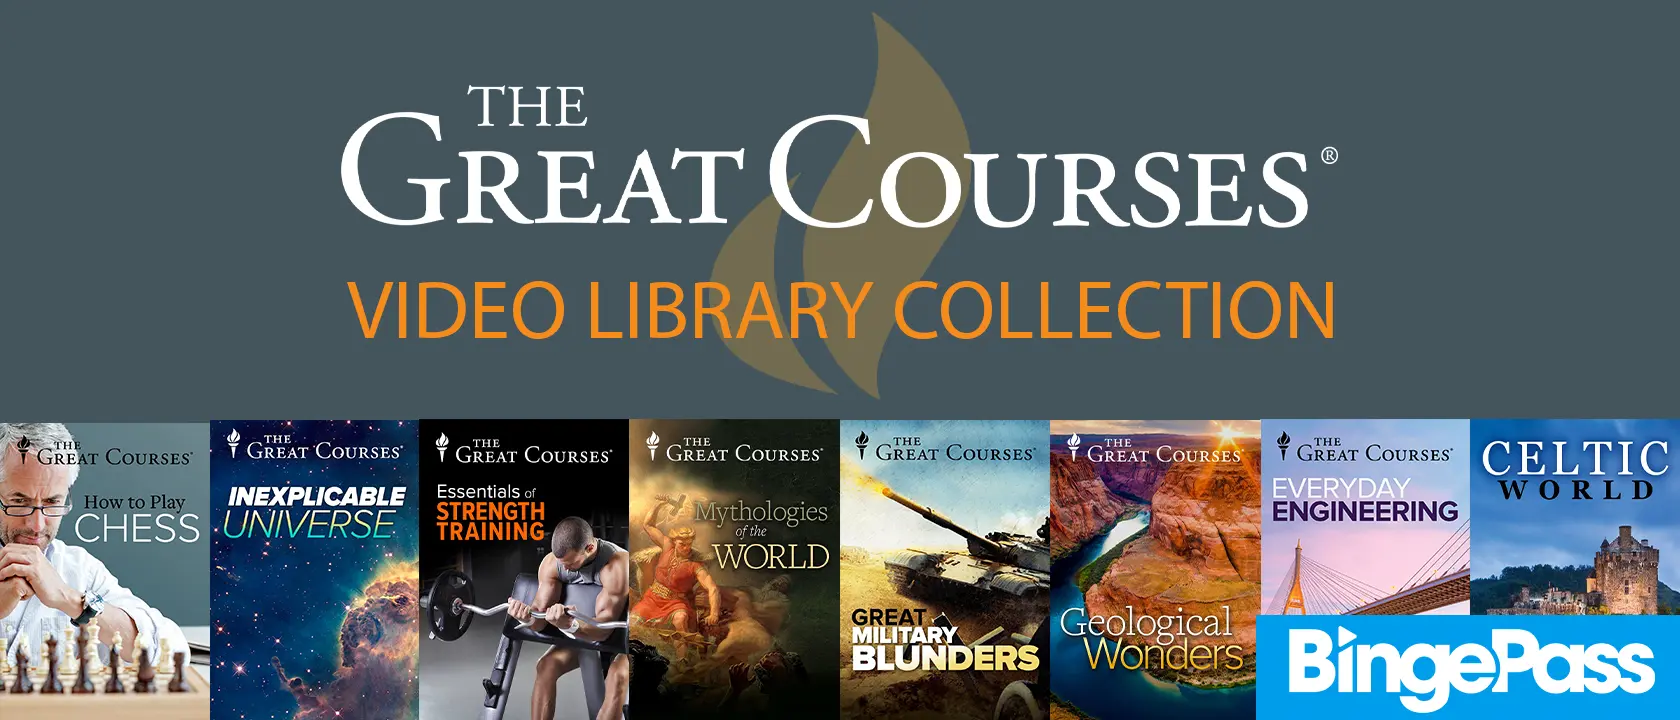 Promotional material for hoopla's The Great Courses Video Library Collection